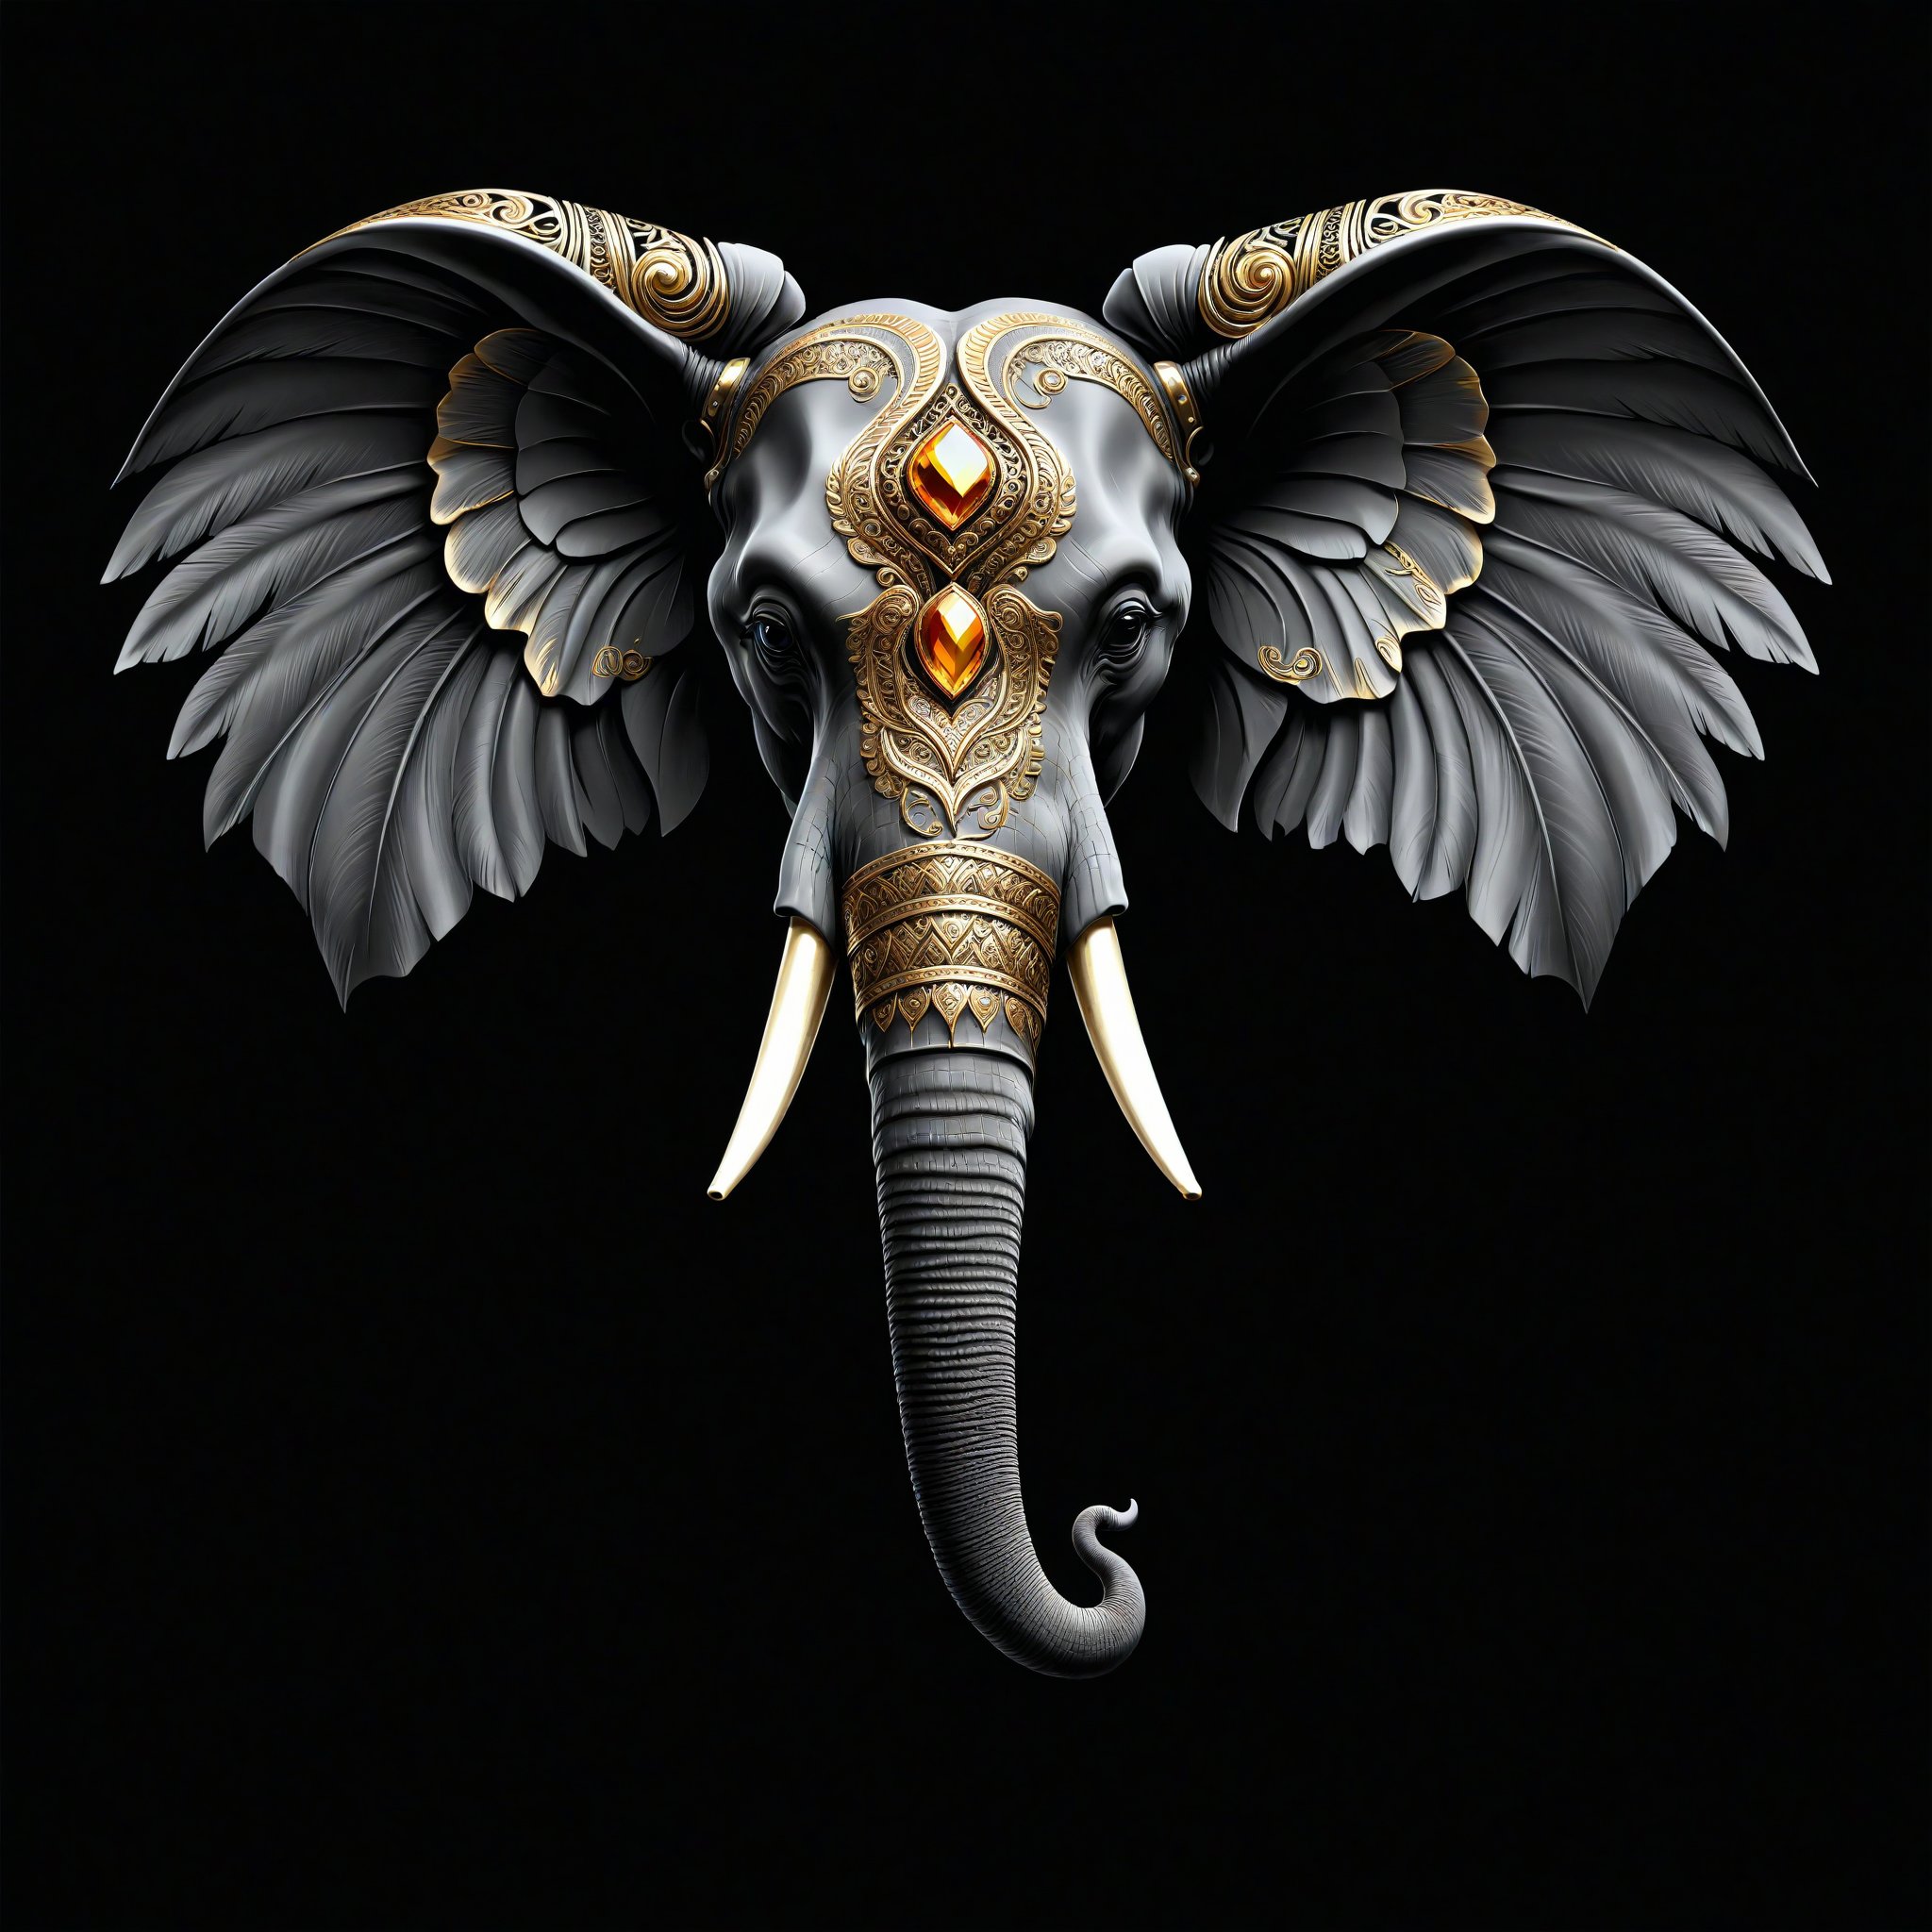 a elephant tribal jewerly whit wing majestic with clasic ornament Mechanical lines Elegance T-shirt design, BLACK BACKGROUND